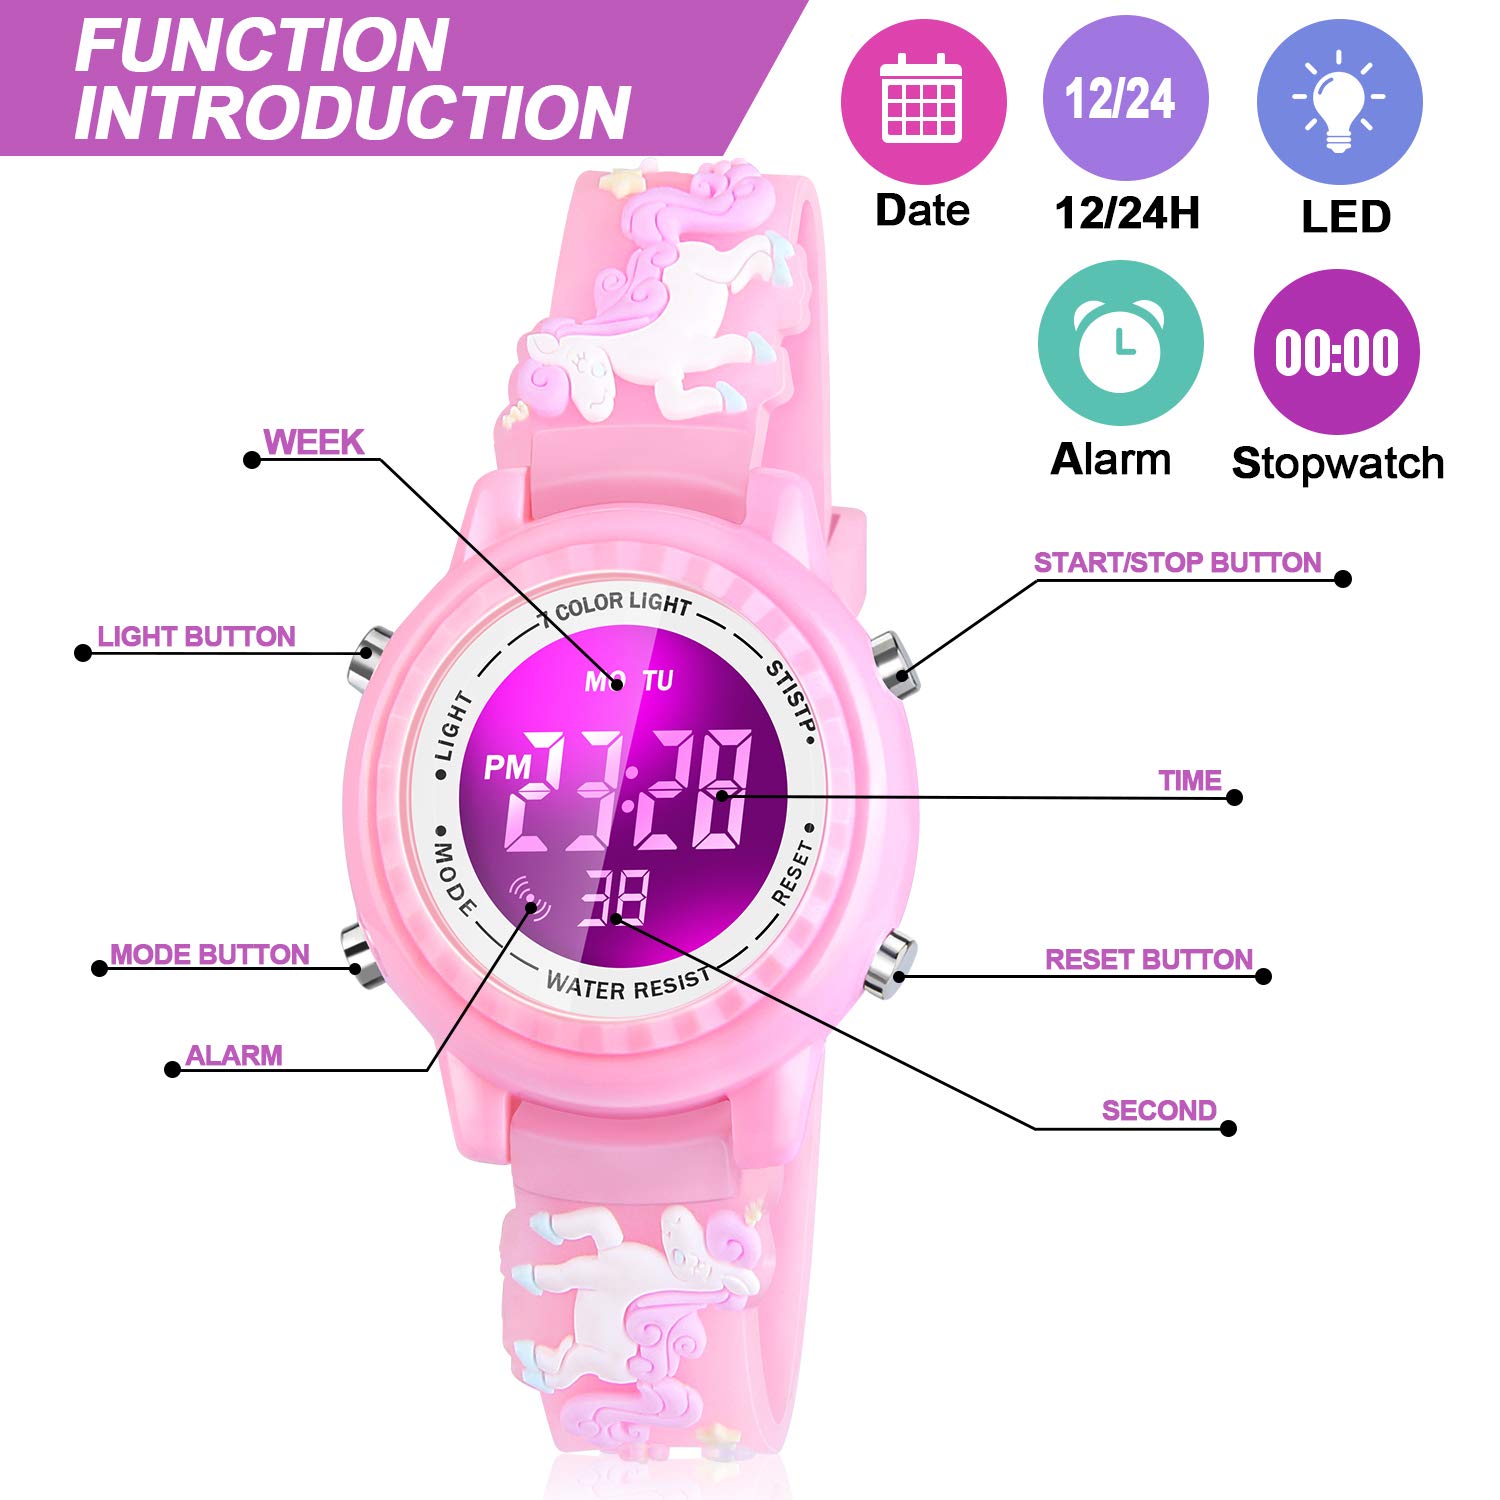 Viposoon Waterproof LED Kids Watches with Alarm - Kids Toys Gifts for Girls Age 3-10